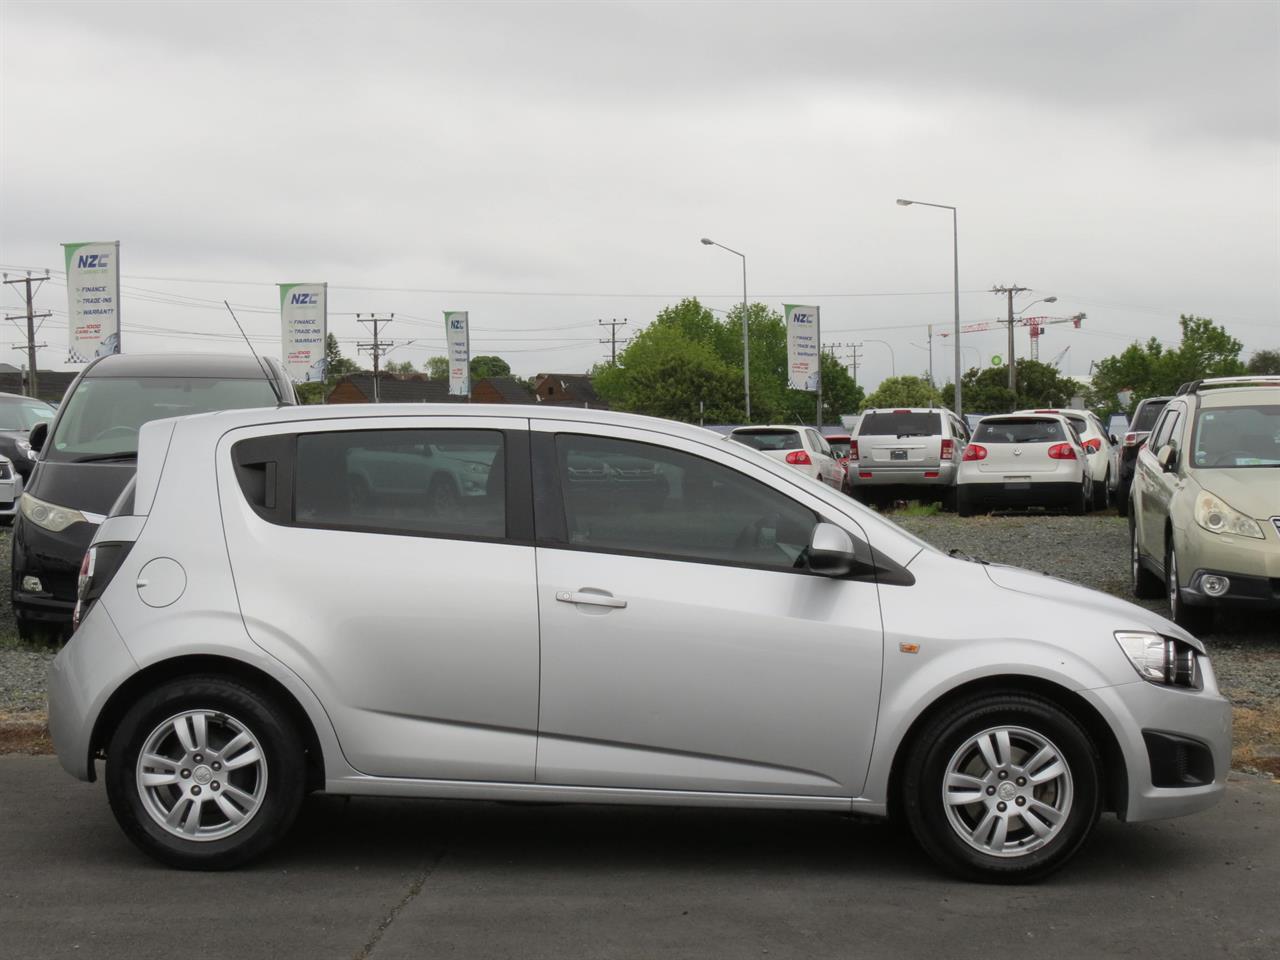 2013 Holden Barina only $25 weekly